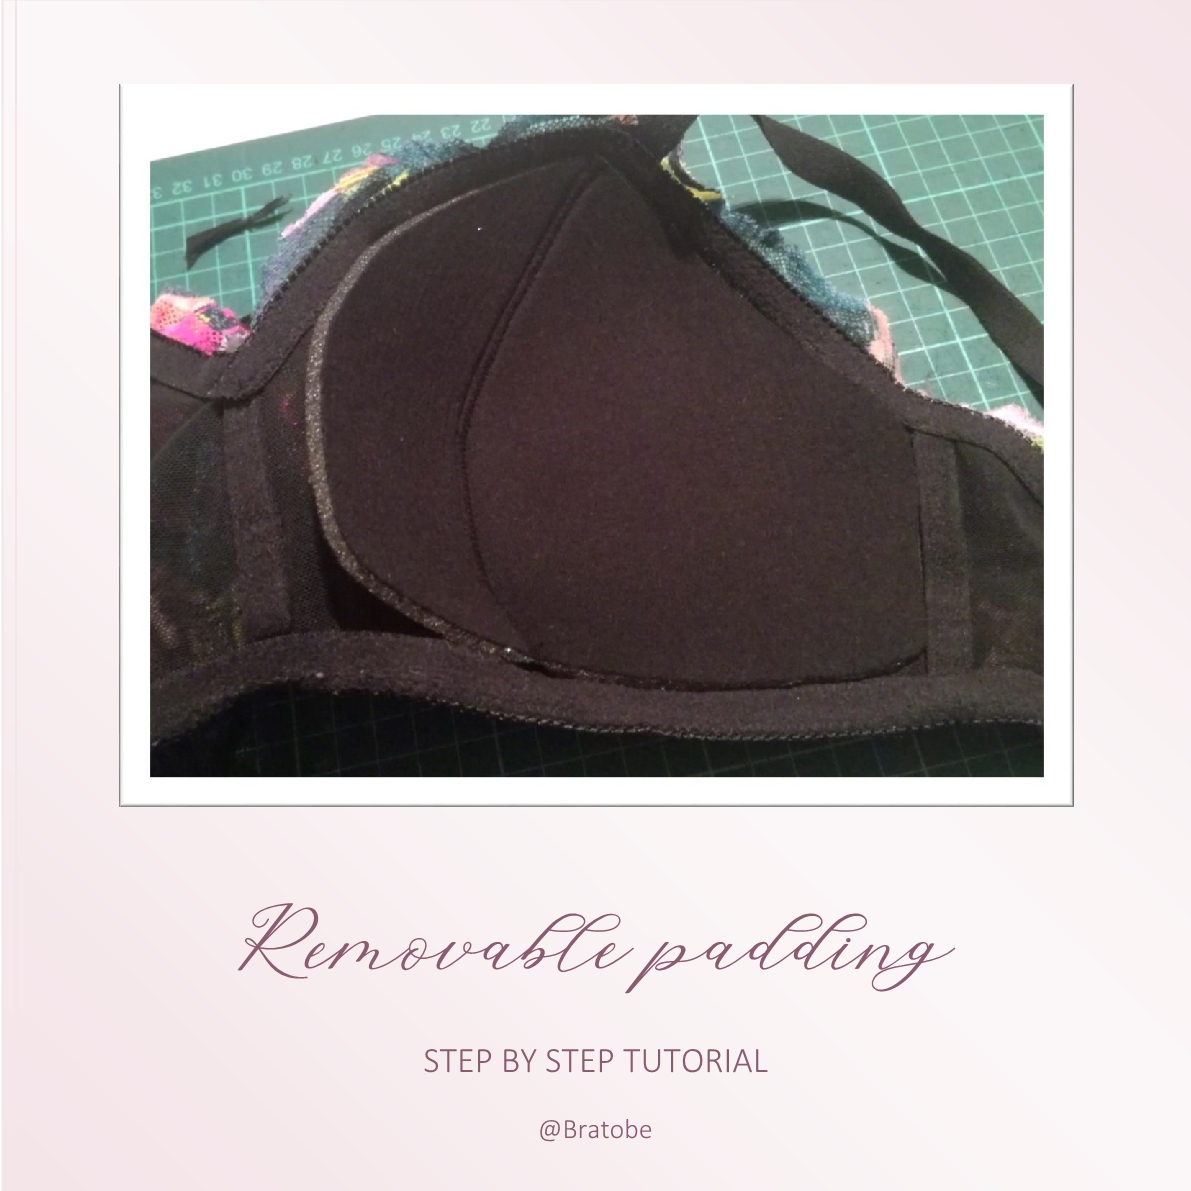 How to make removable padding for your bralette